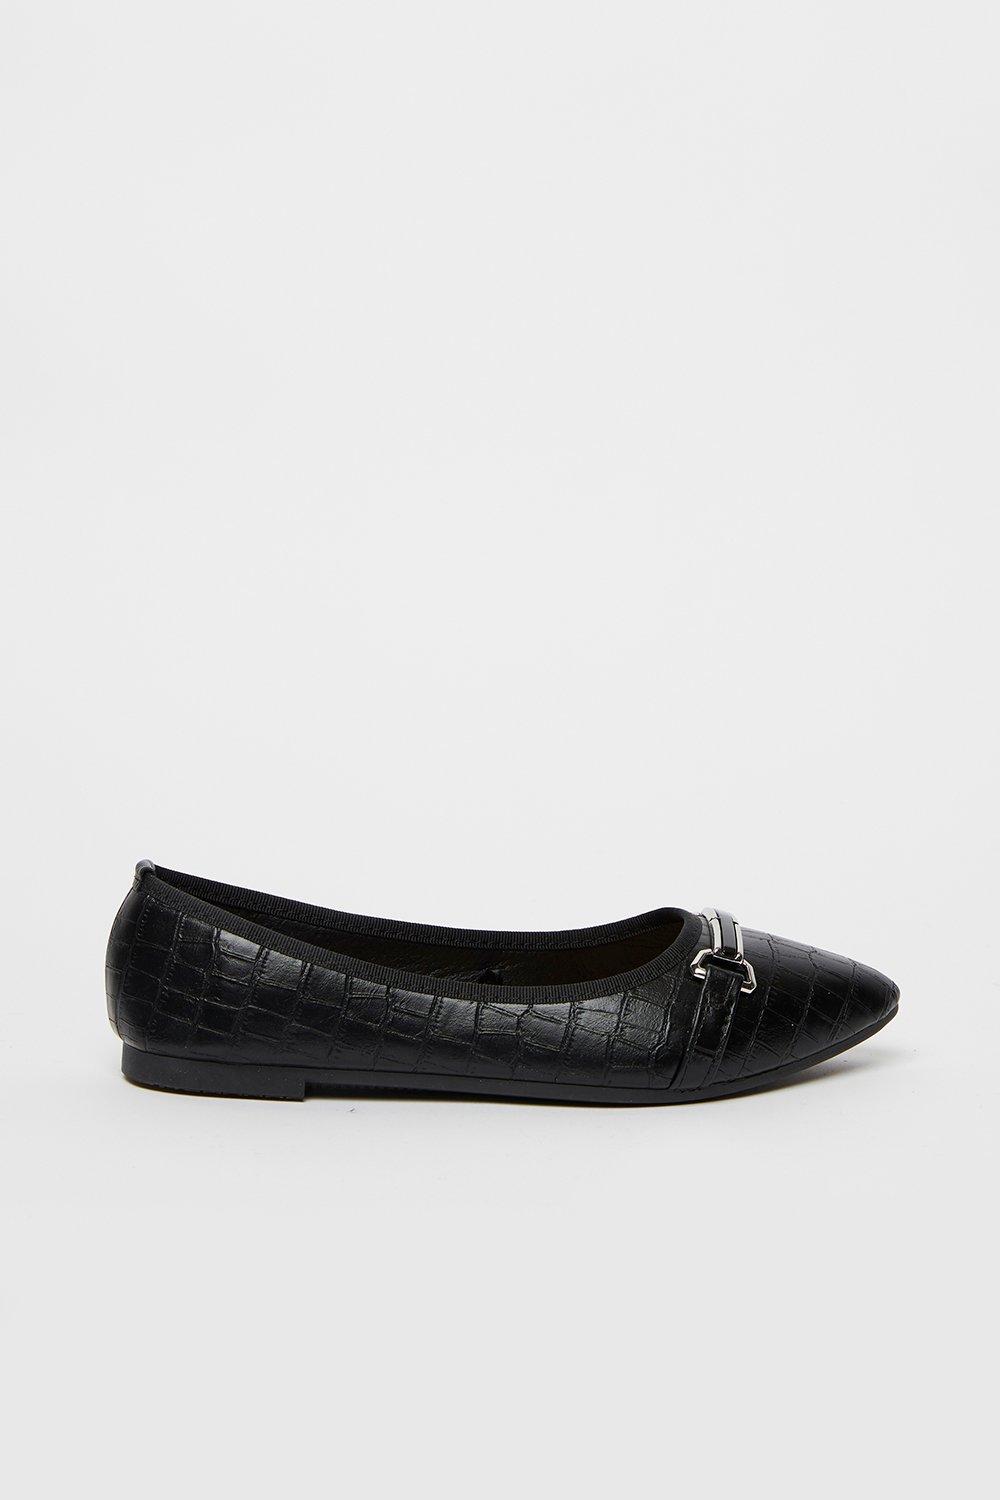 Refresh Your Wardrobe Staples With These Classic Black Flats. A Textured Finish, Metallic Feature Trim And Pointed Toe Keep These On-Trend, Whilst An Easy Slip On Design And Flat Heel Will Have You Wearing These On-Repeat.  Heel Height: 10Mm Ballet P